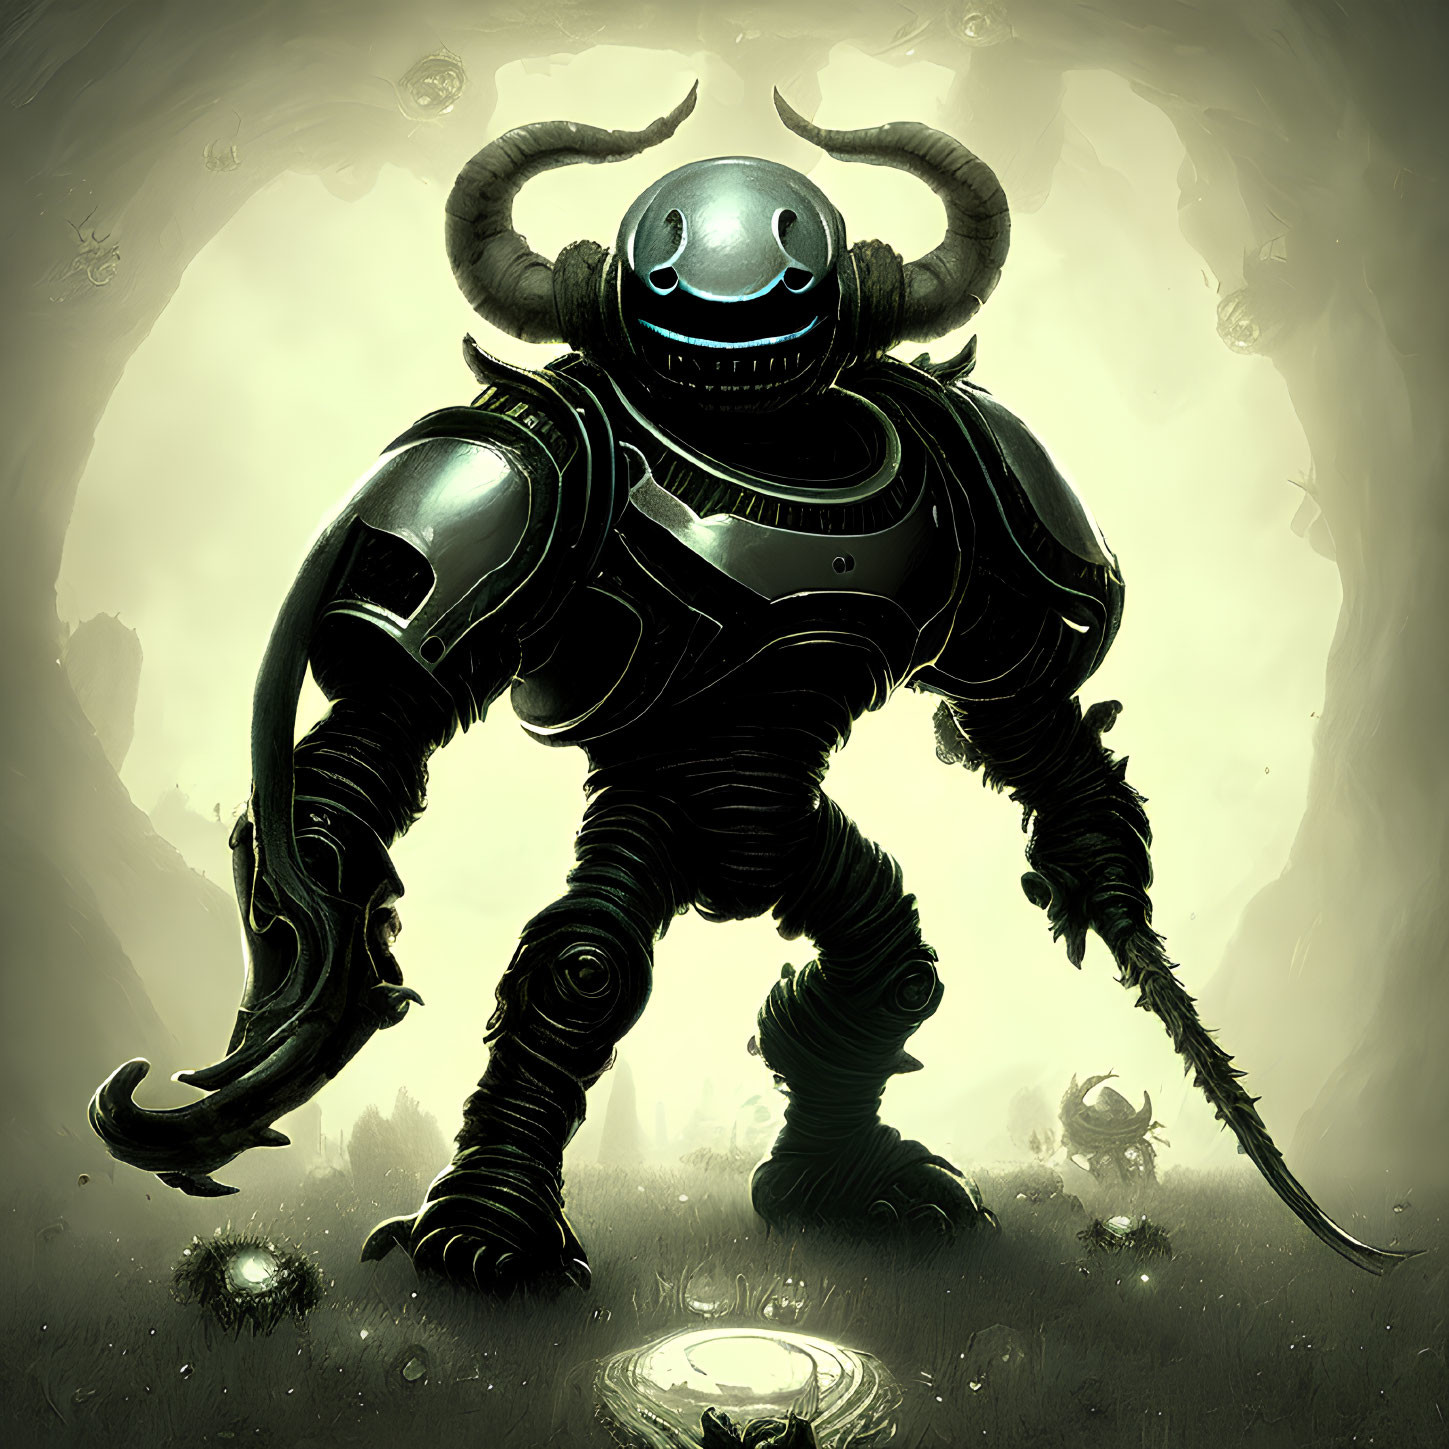 Armored figure with glowing eyes and large horns in misty landscape holding weapon